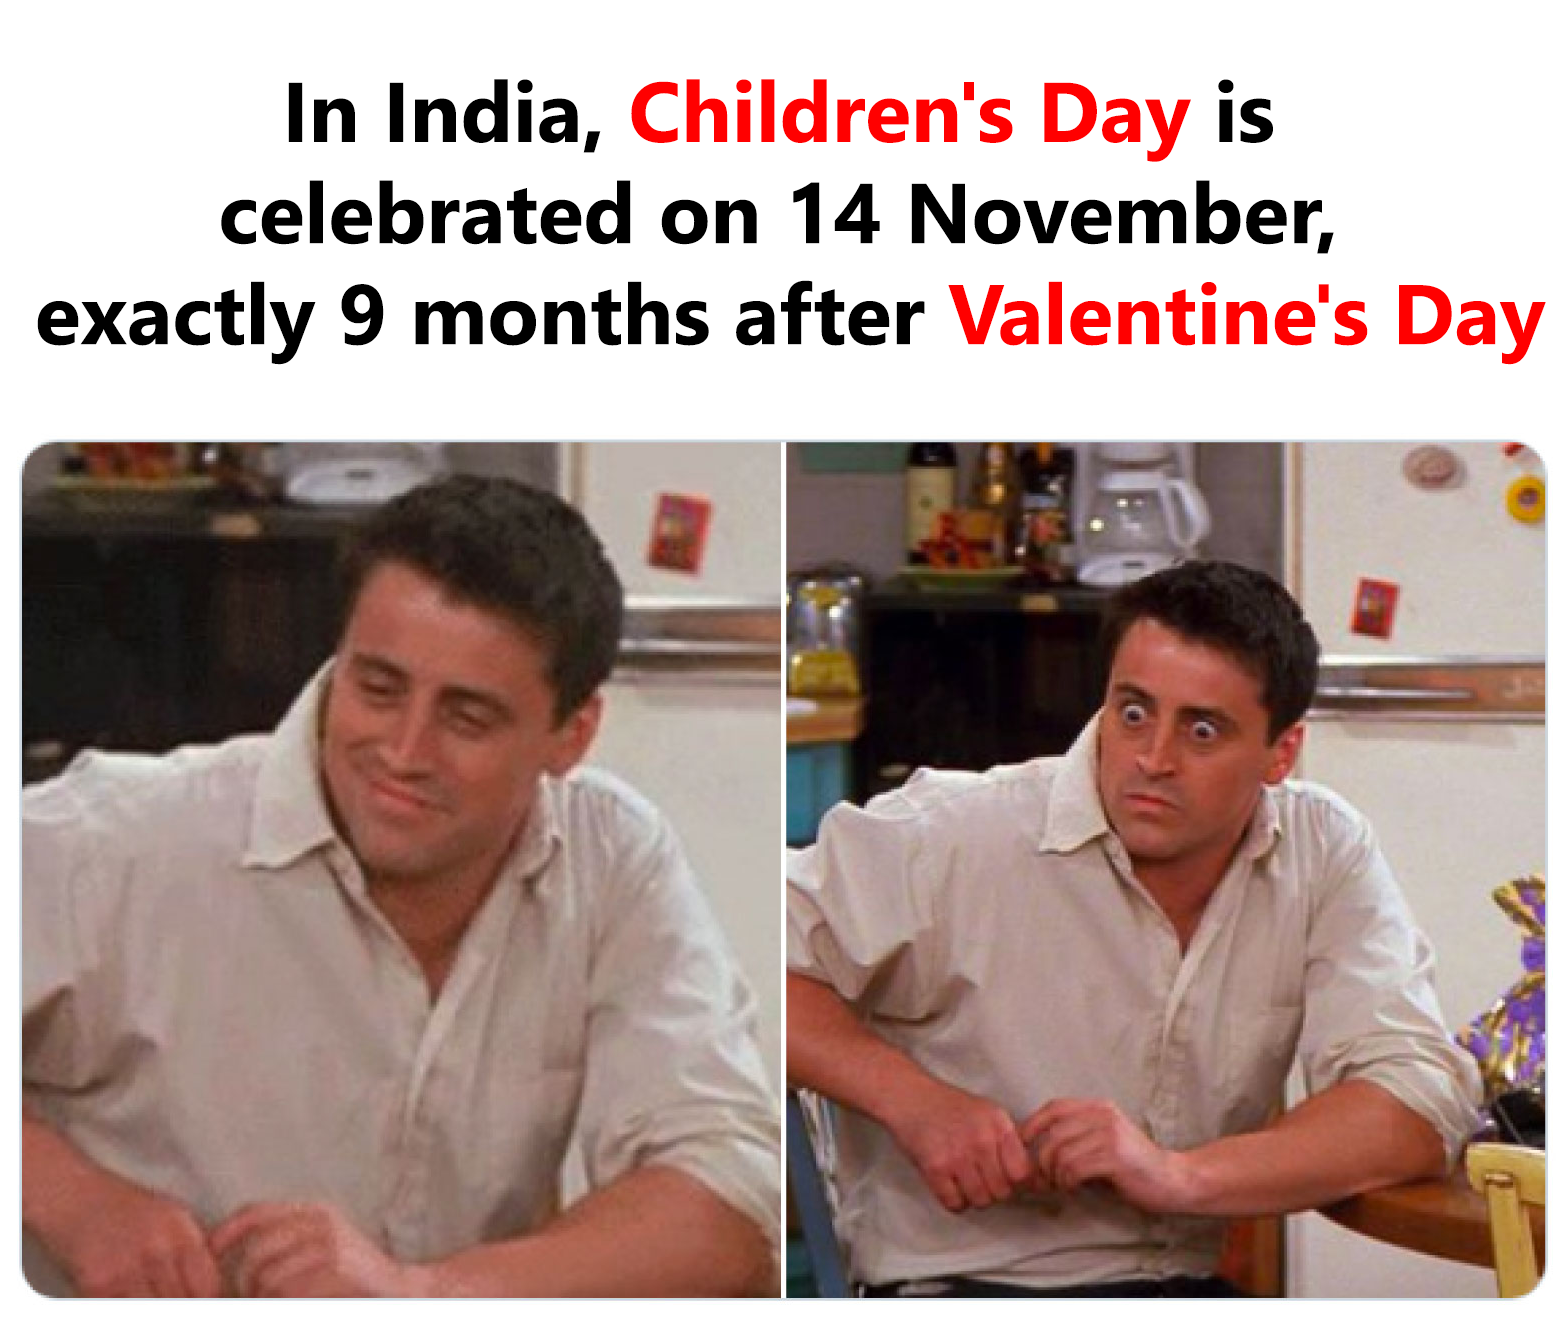 wandavision theory meme - In India, Children's Day is celebrated on 14 November, exactly 9 months after Valentine's Day